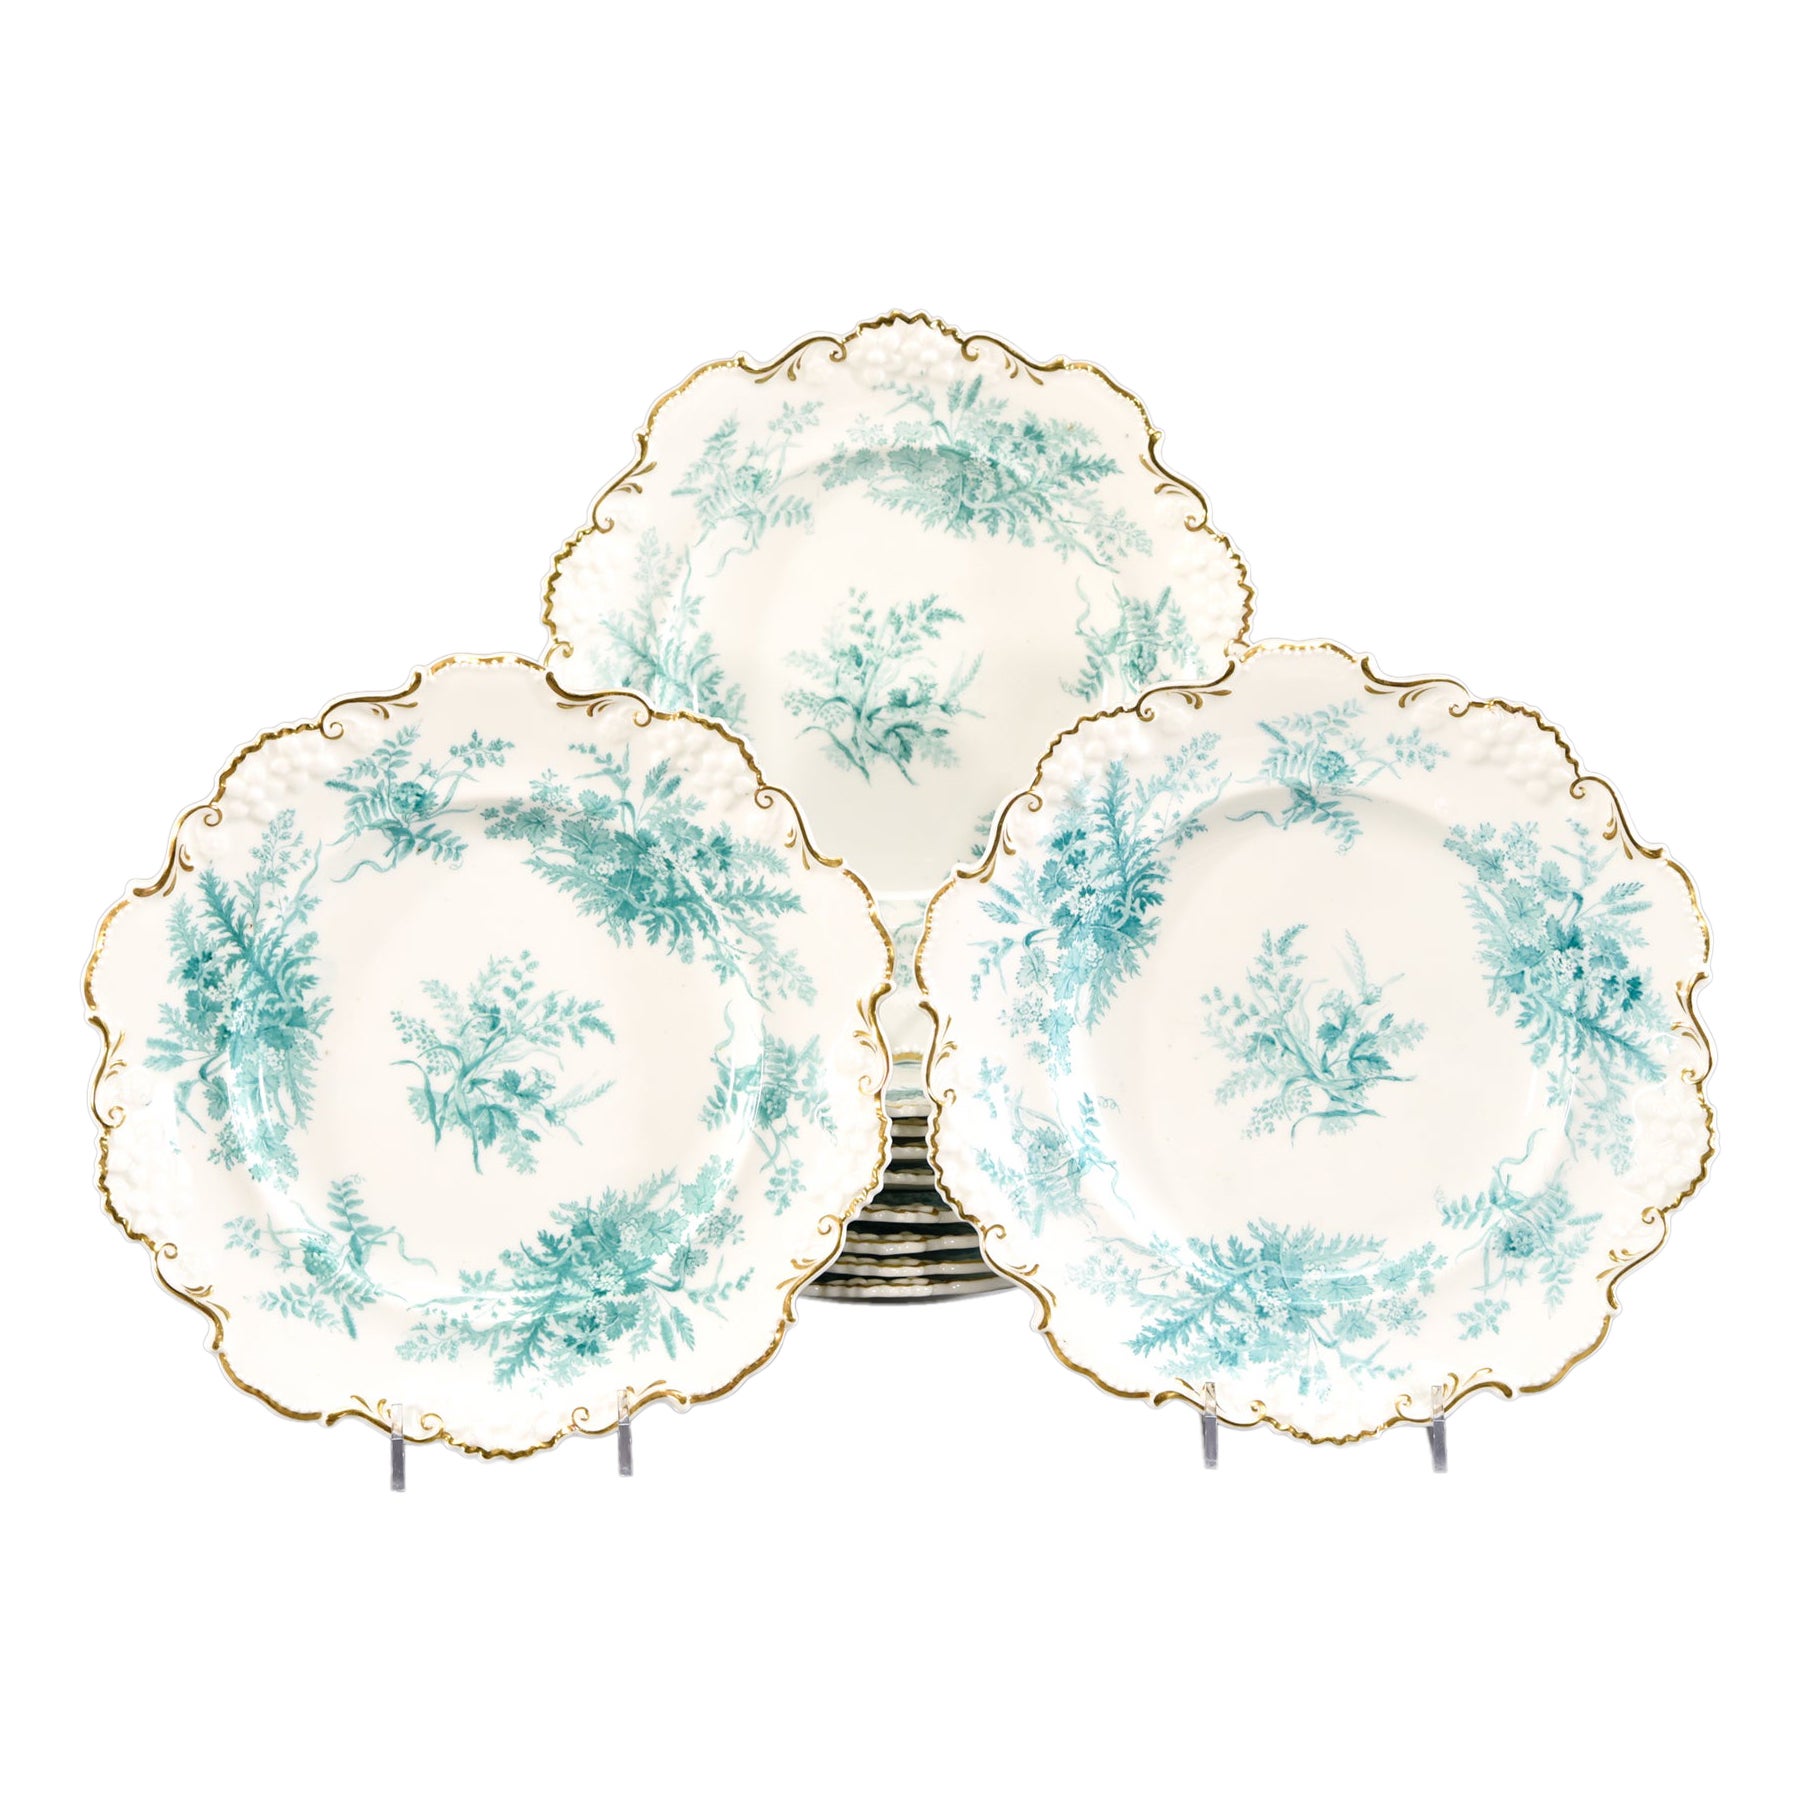  13 Davenport 19th c.  Dessert Set W/ Aesthetic Movement Teal Blue Fern Subjects For Sale